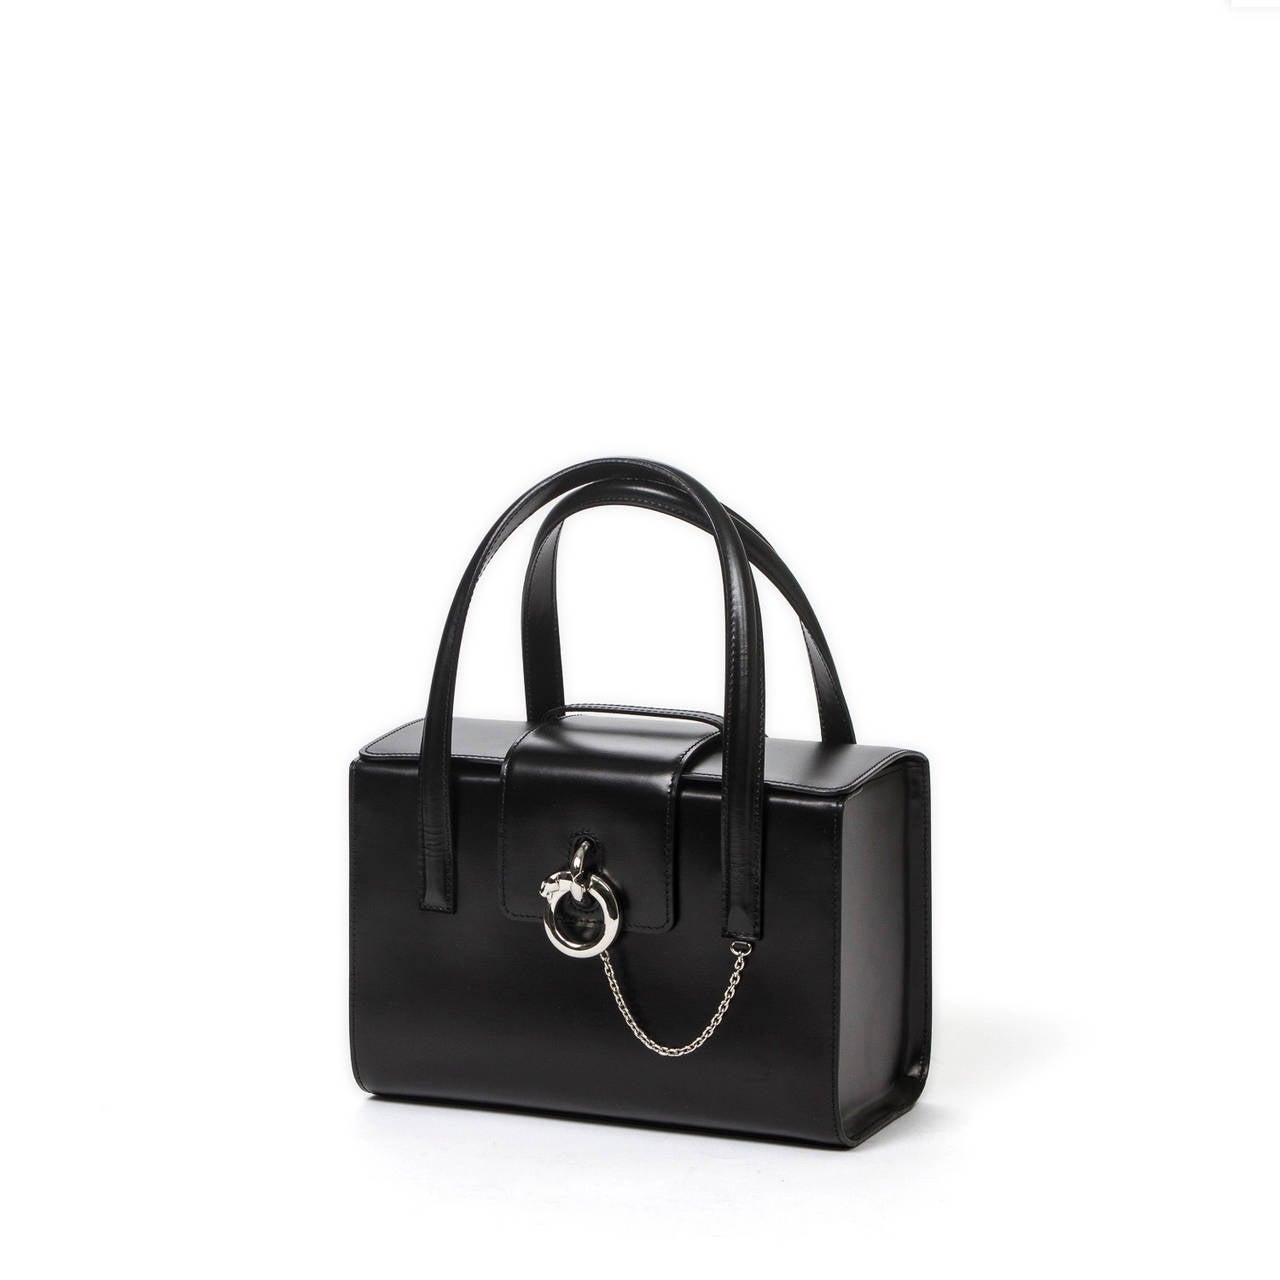 Cartier Box handbag in black leather with chain and leopard ring closure, silver tone hardware.